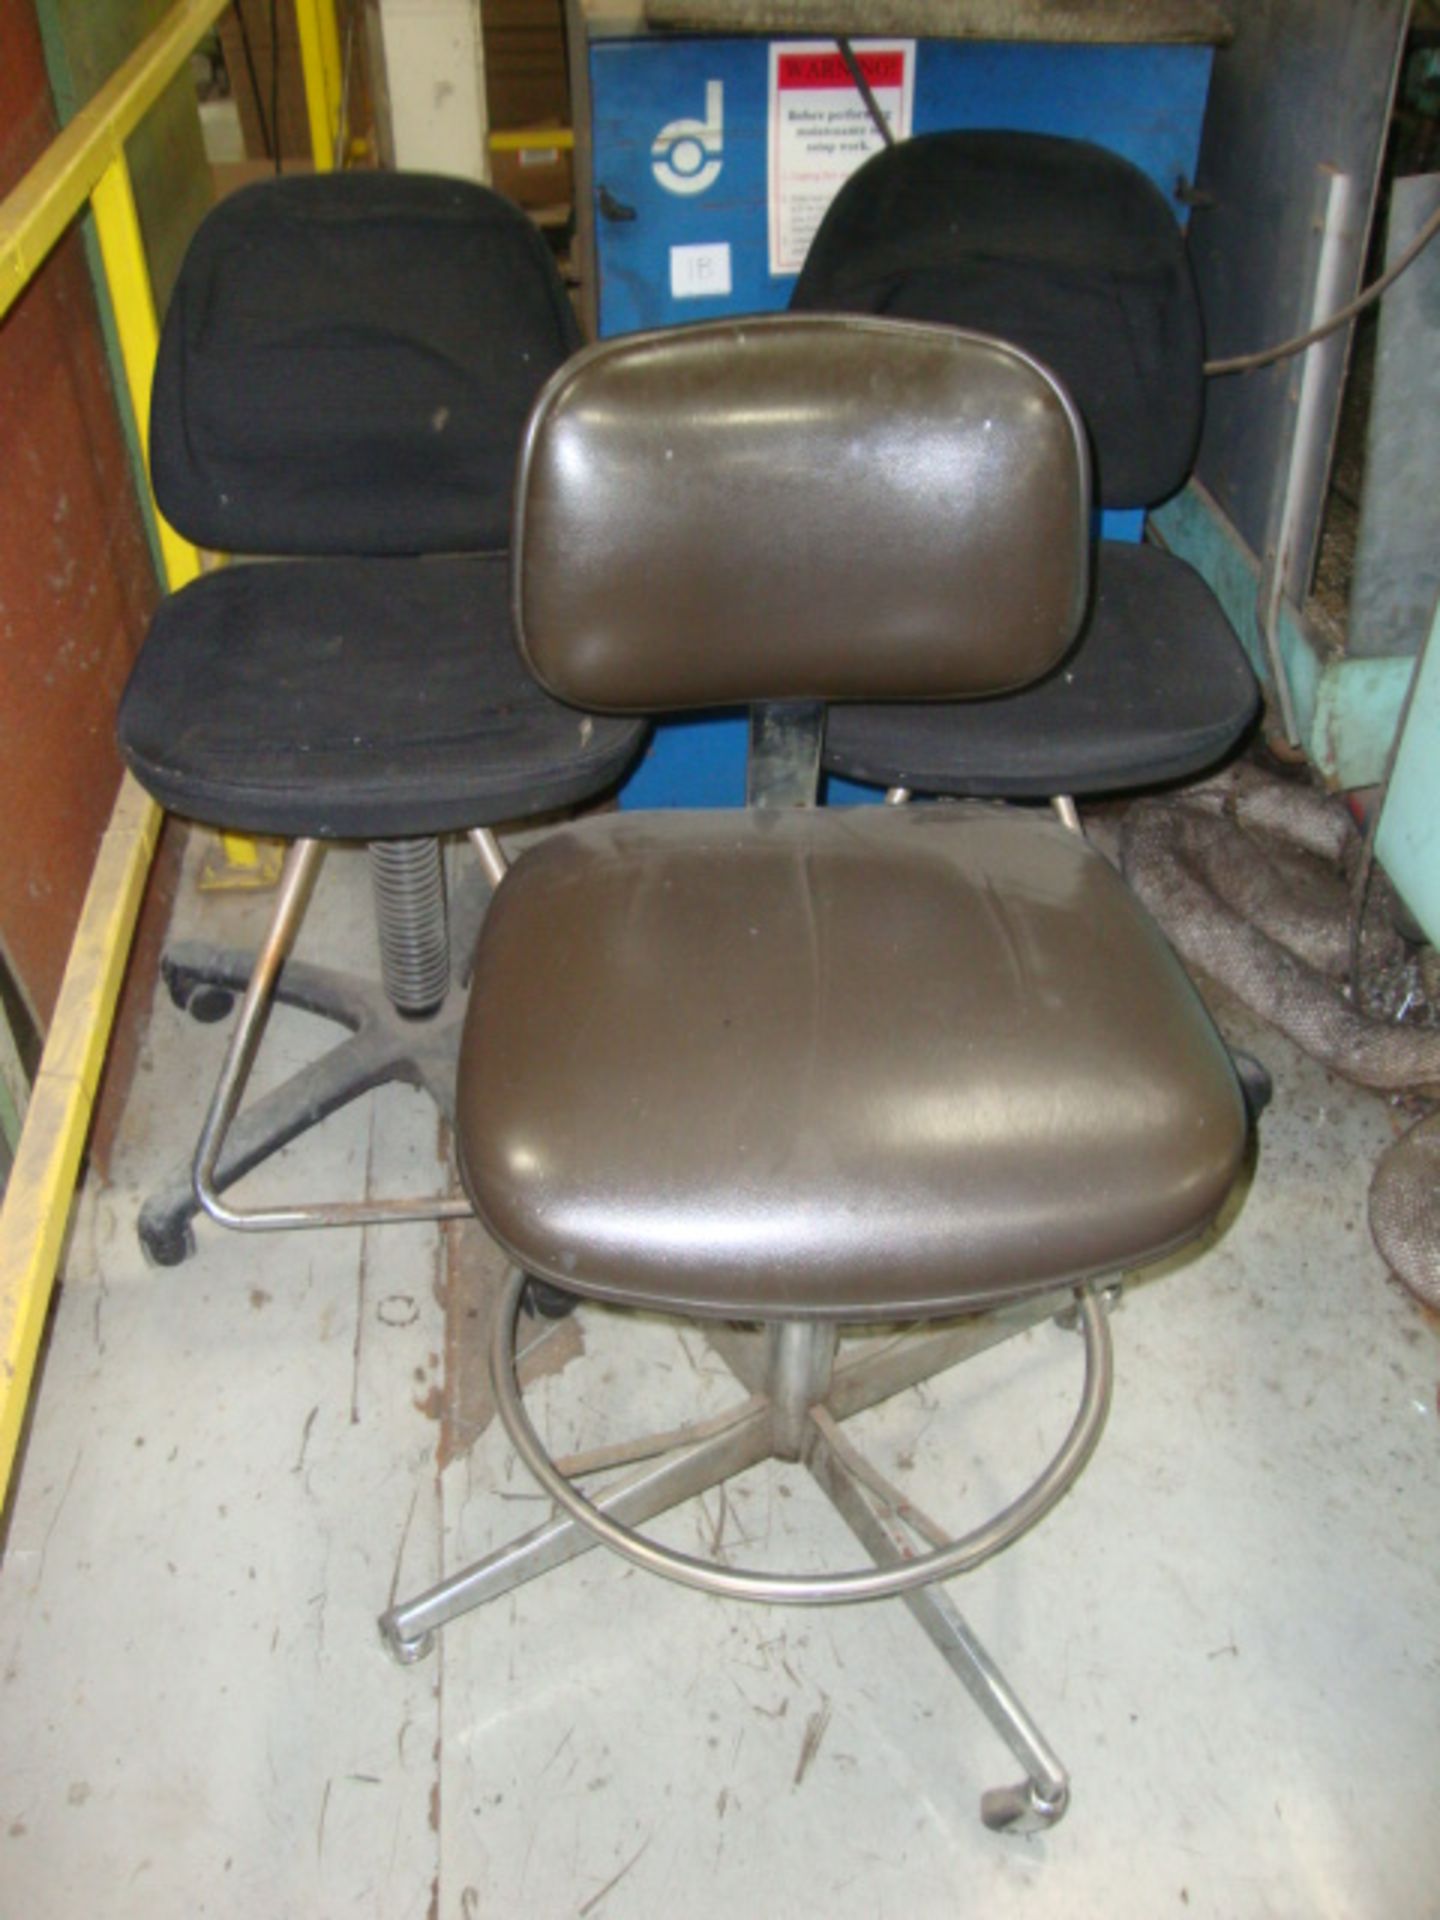 Lot of 6 Assorted Chairs and Mop Bucket - Image 4 of 4